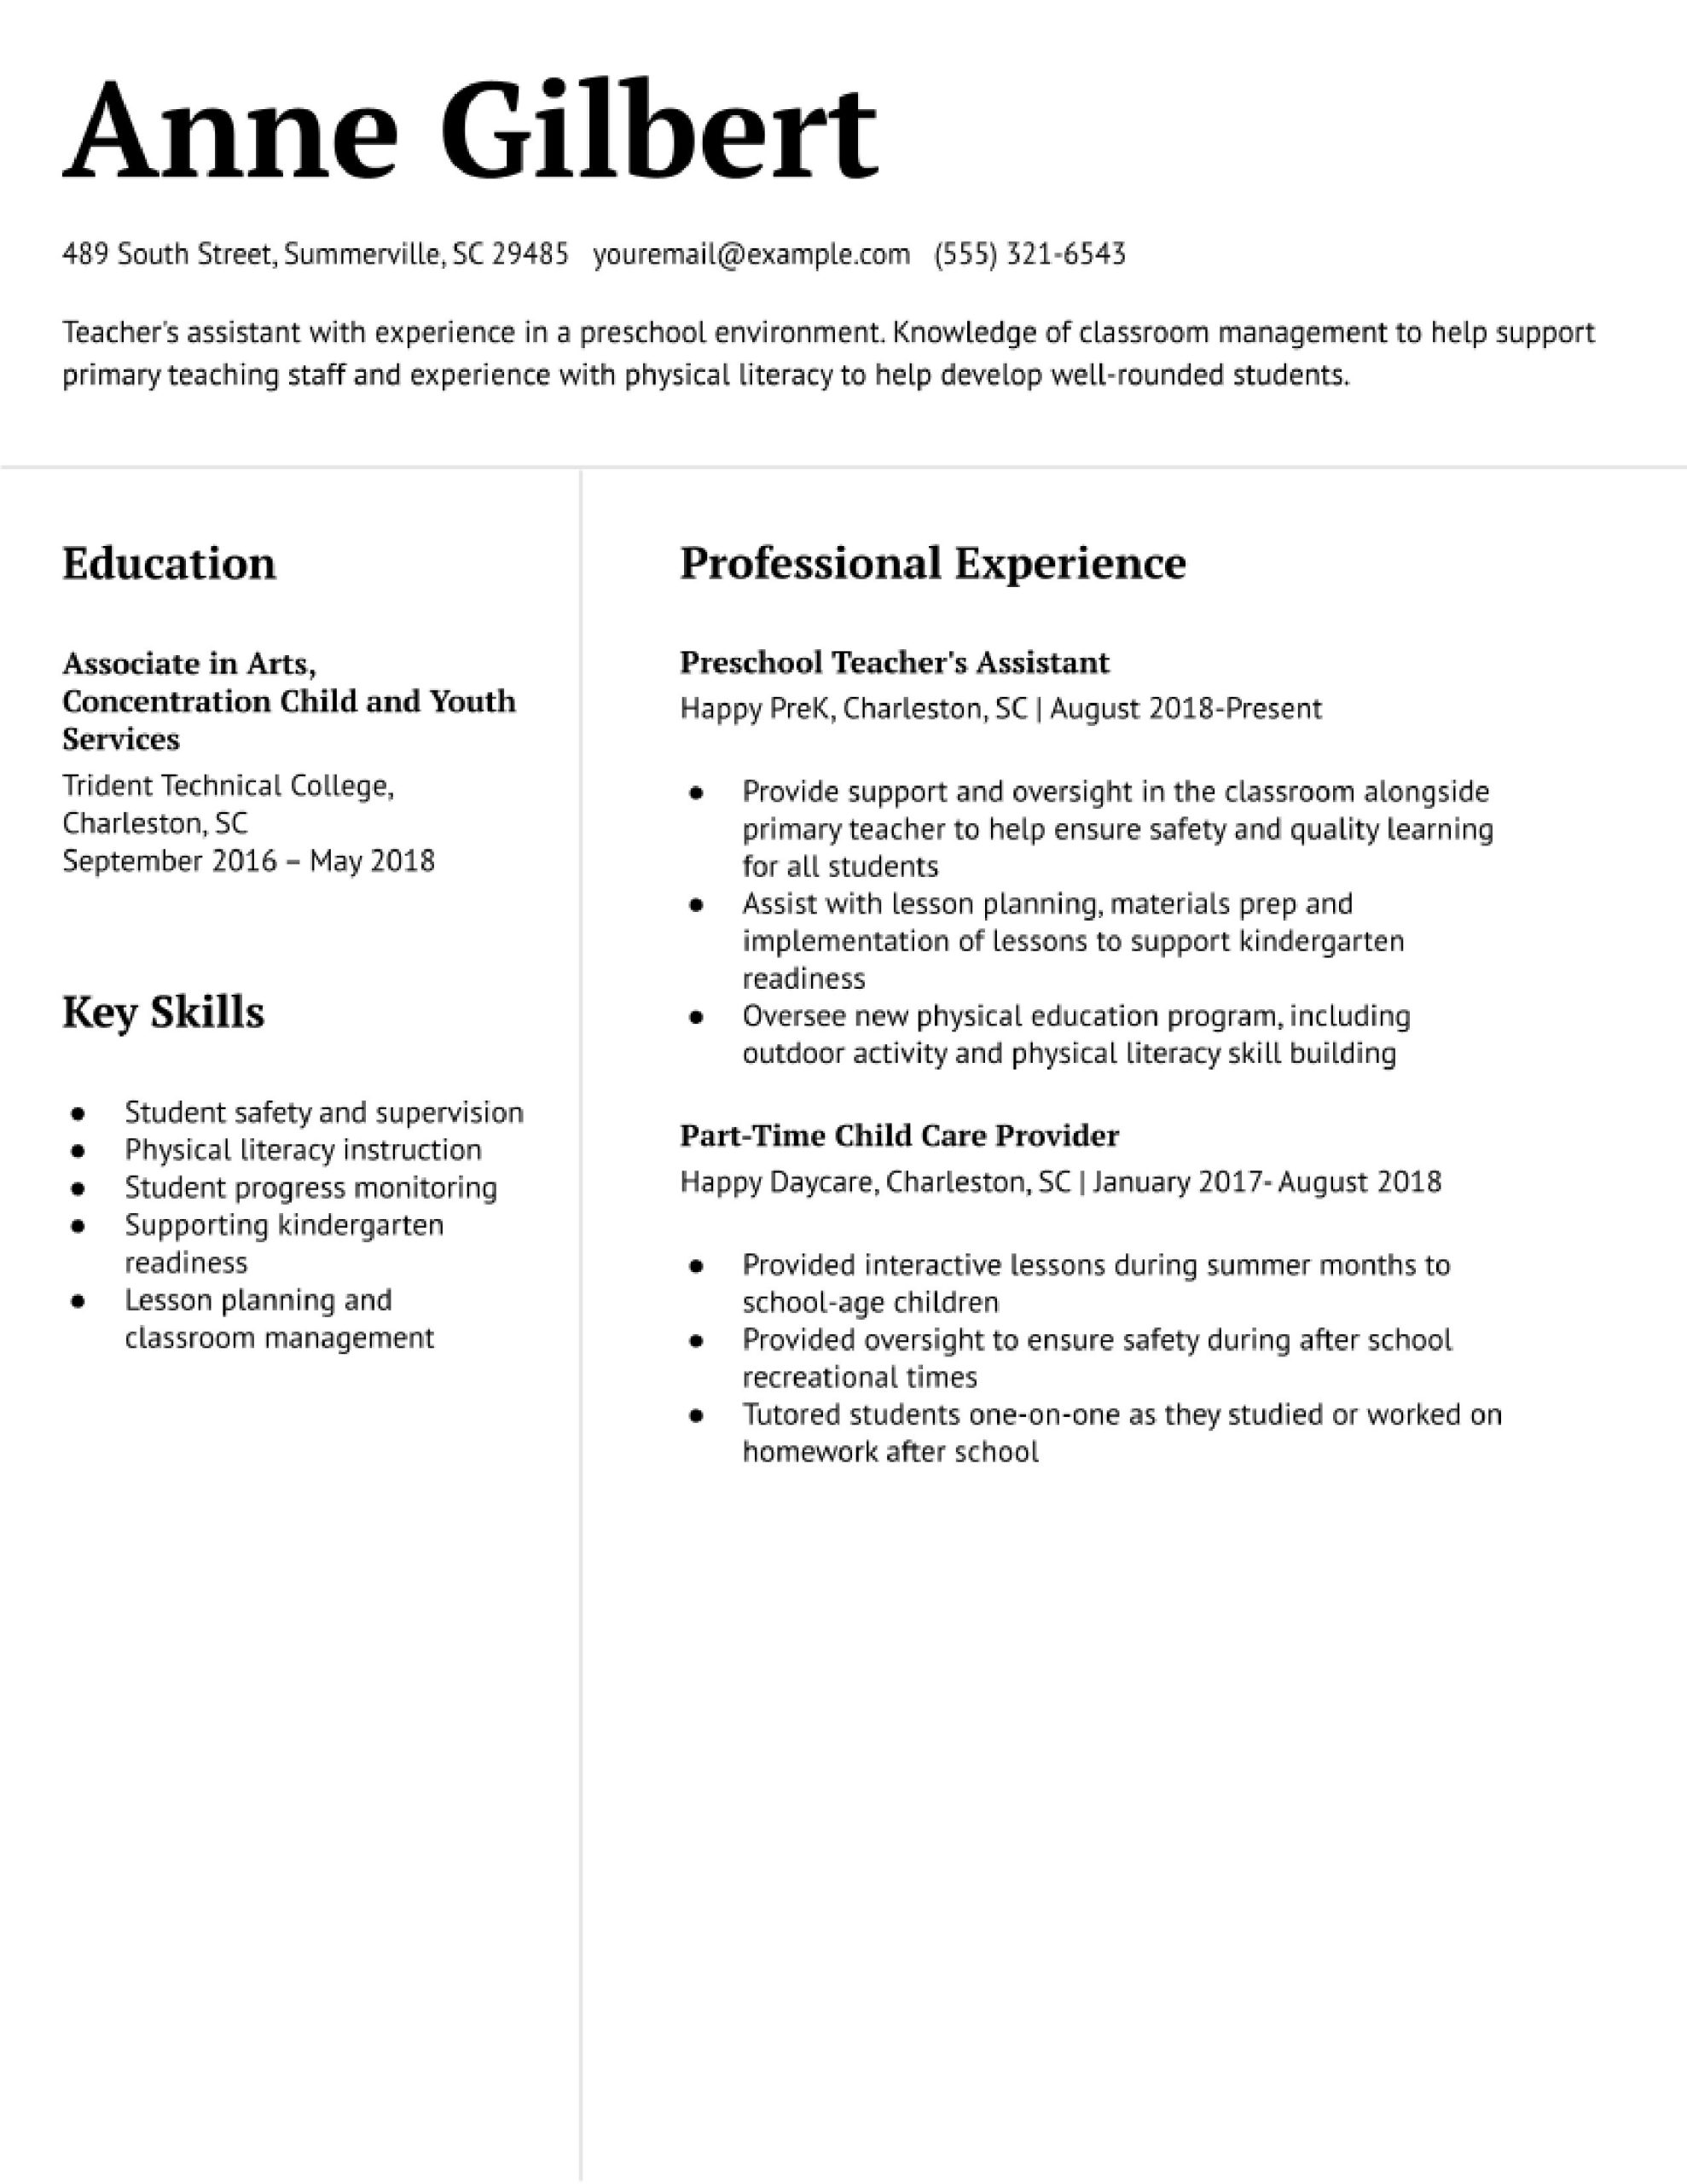 Sample Resumes for Teaching assistant Positions Teacher assistant Resume Examples In 2022 – Resumebuilder.com